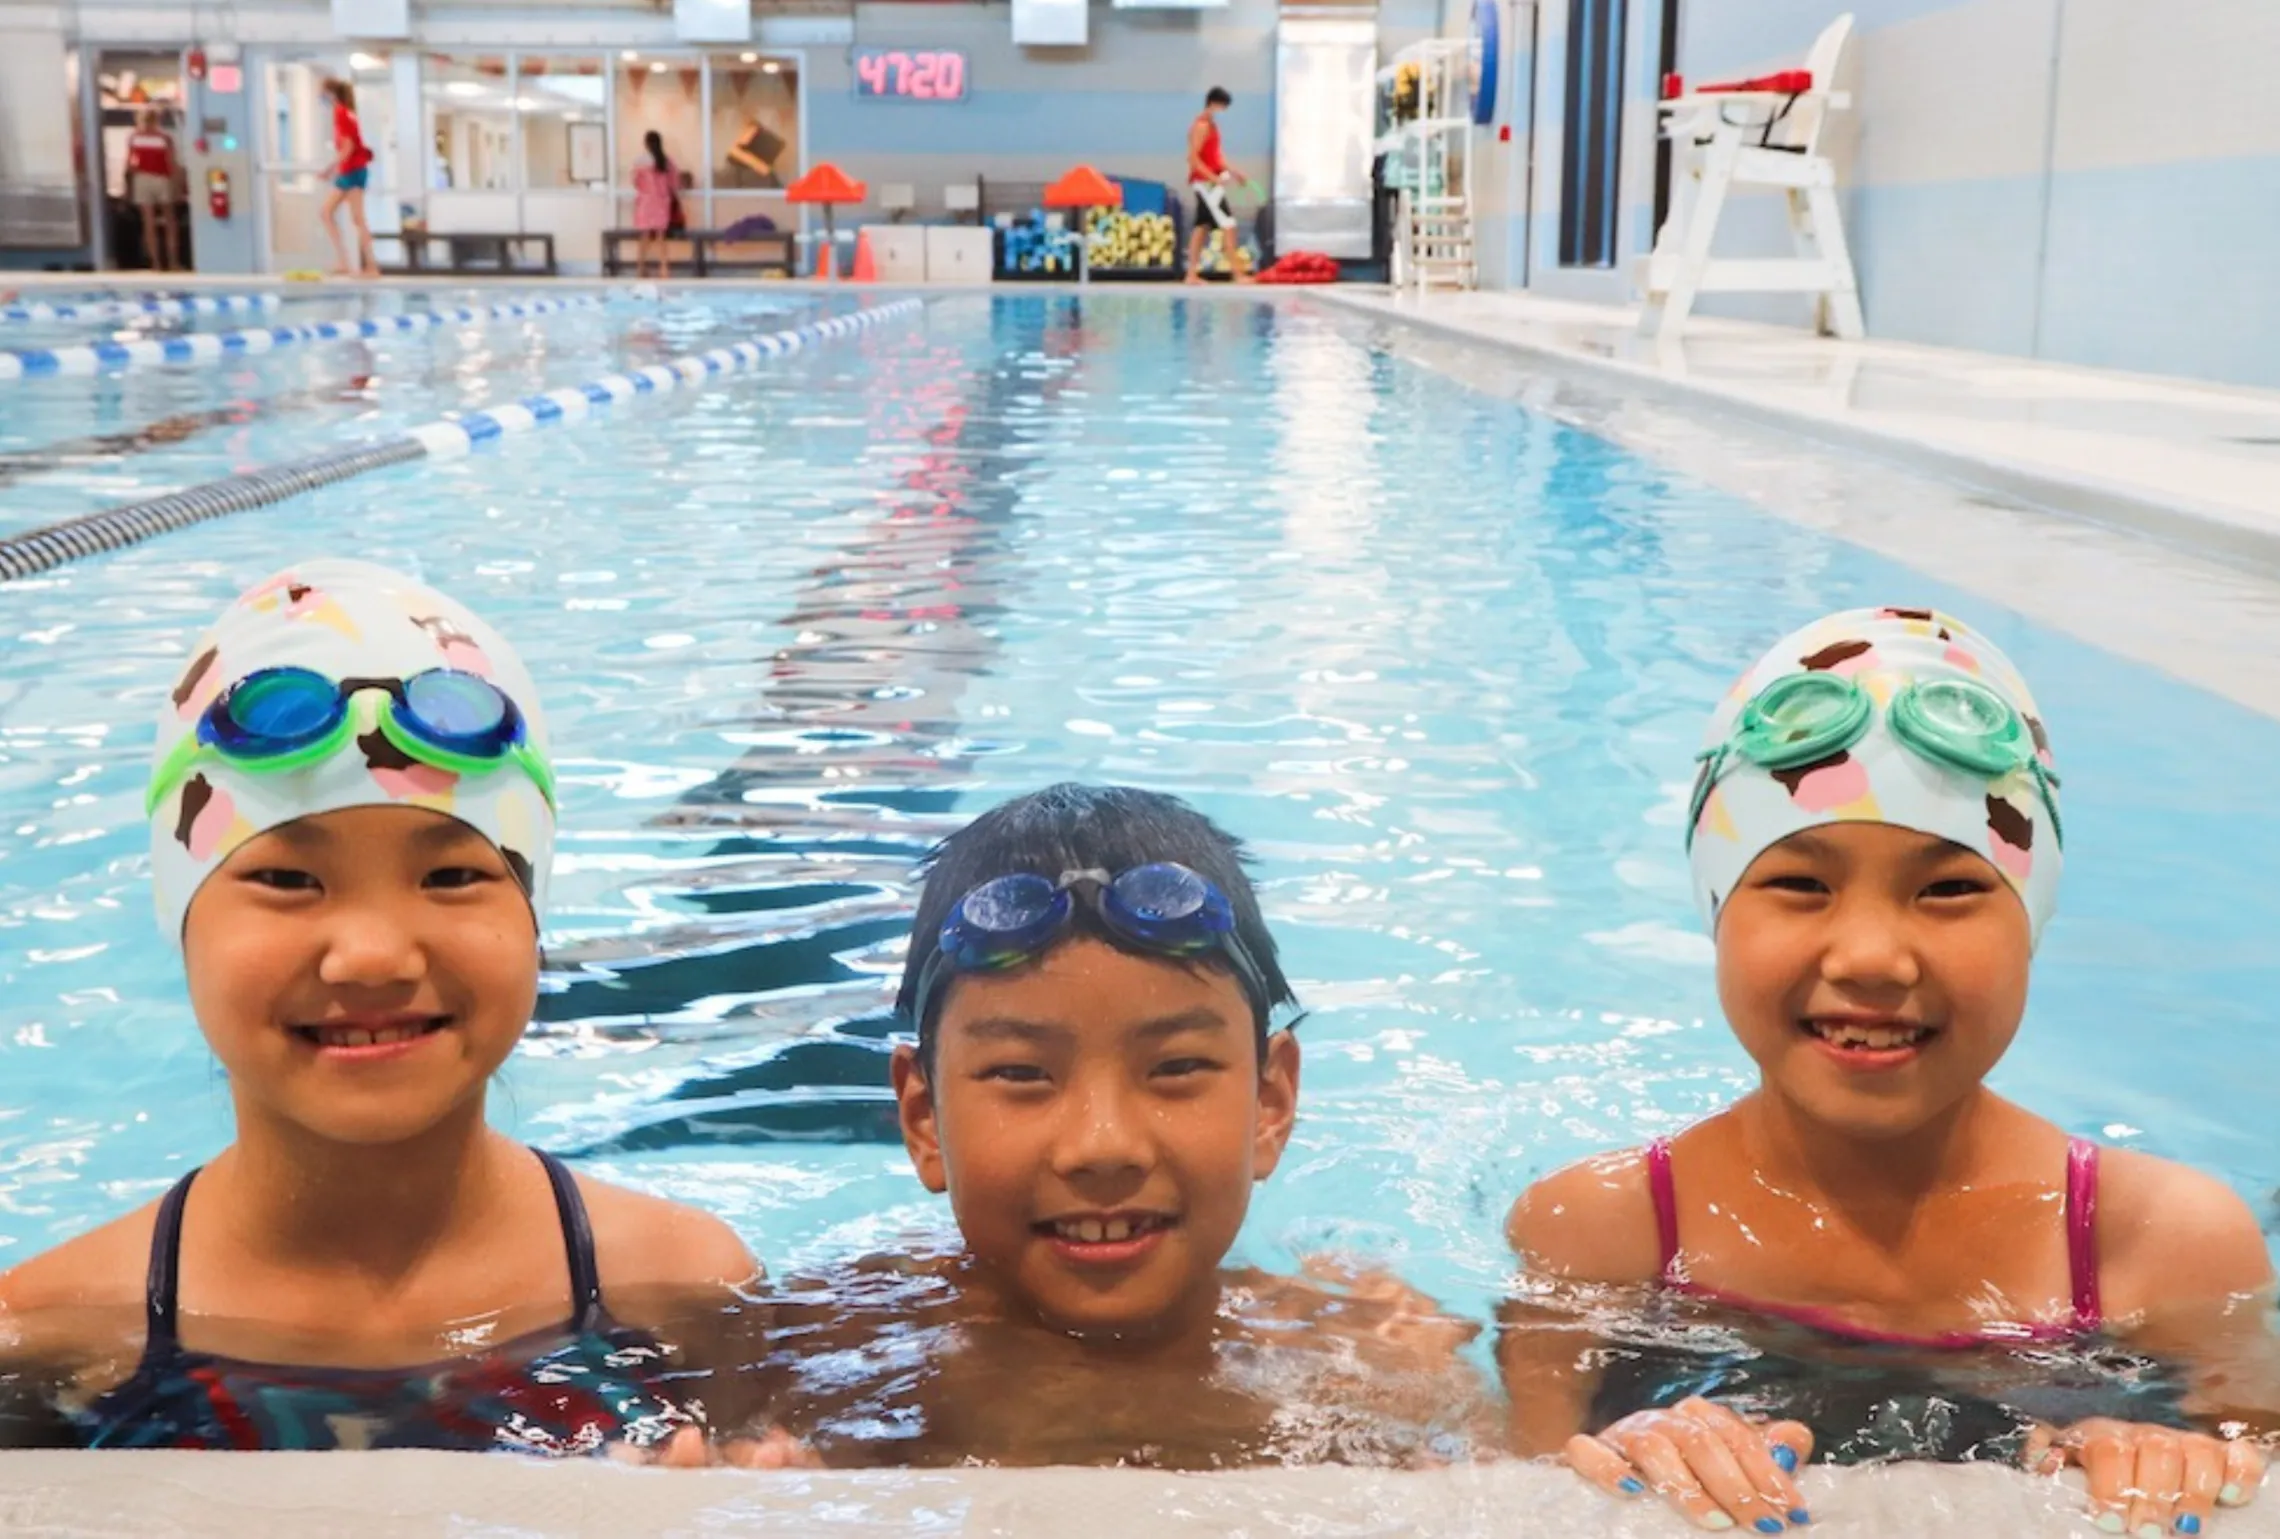 Three youth in the pool smiling